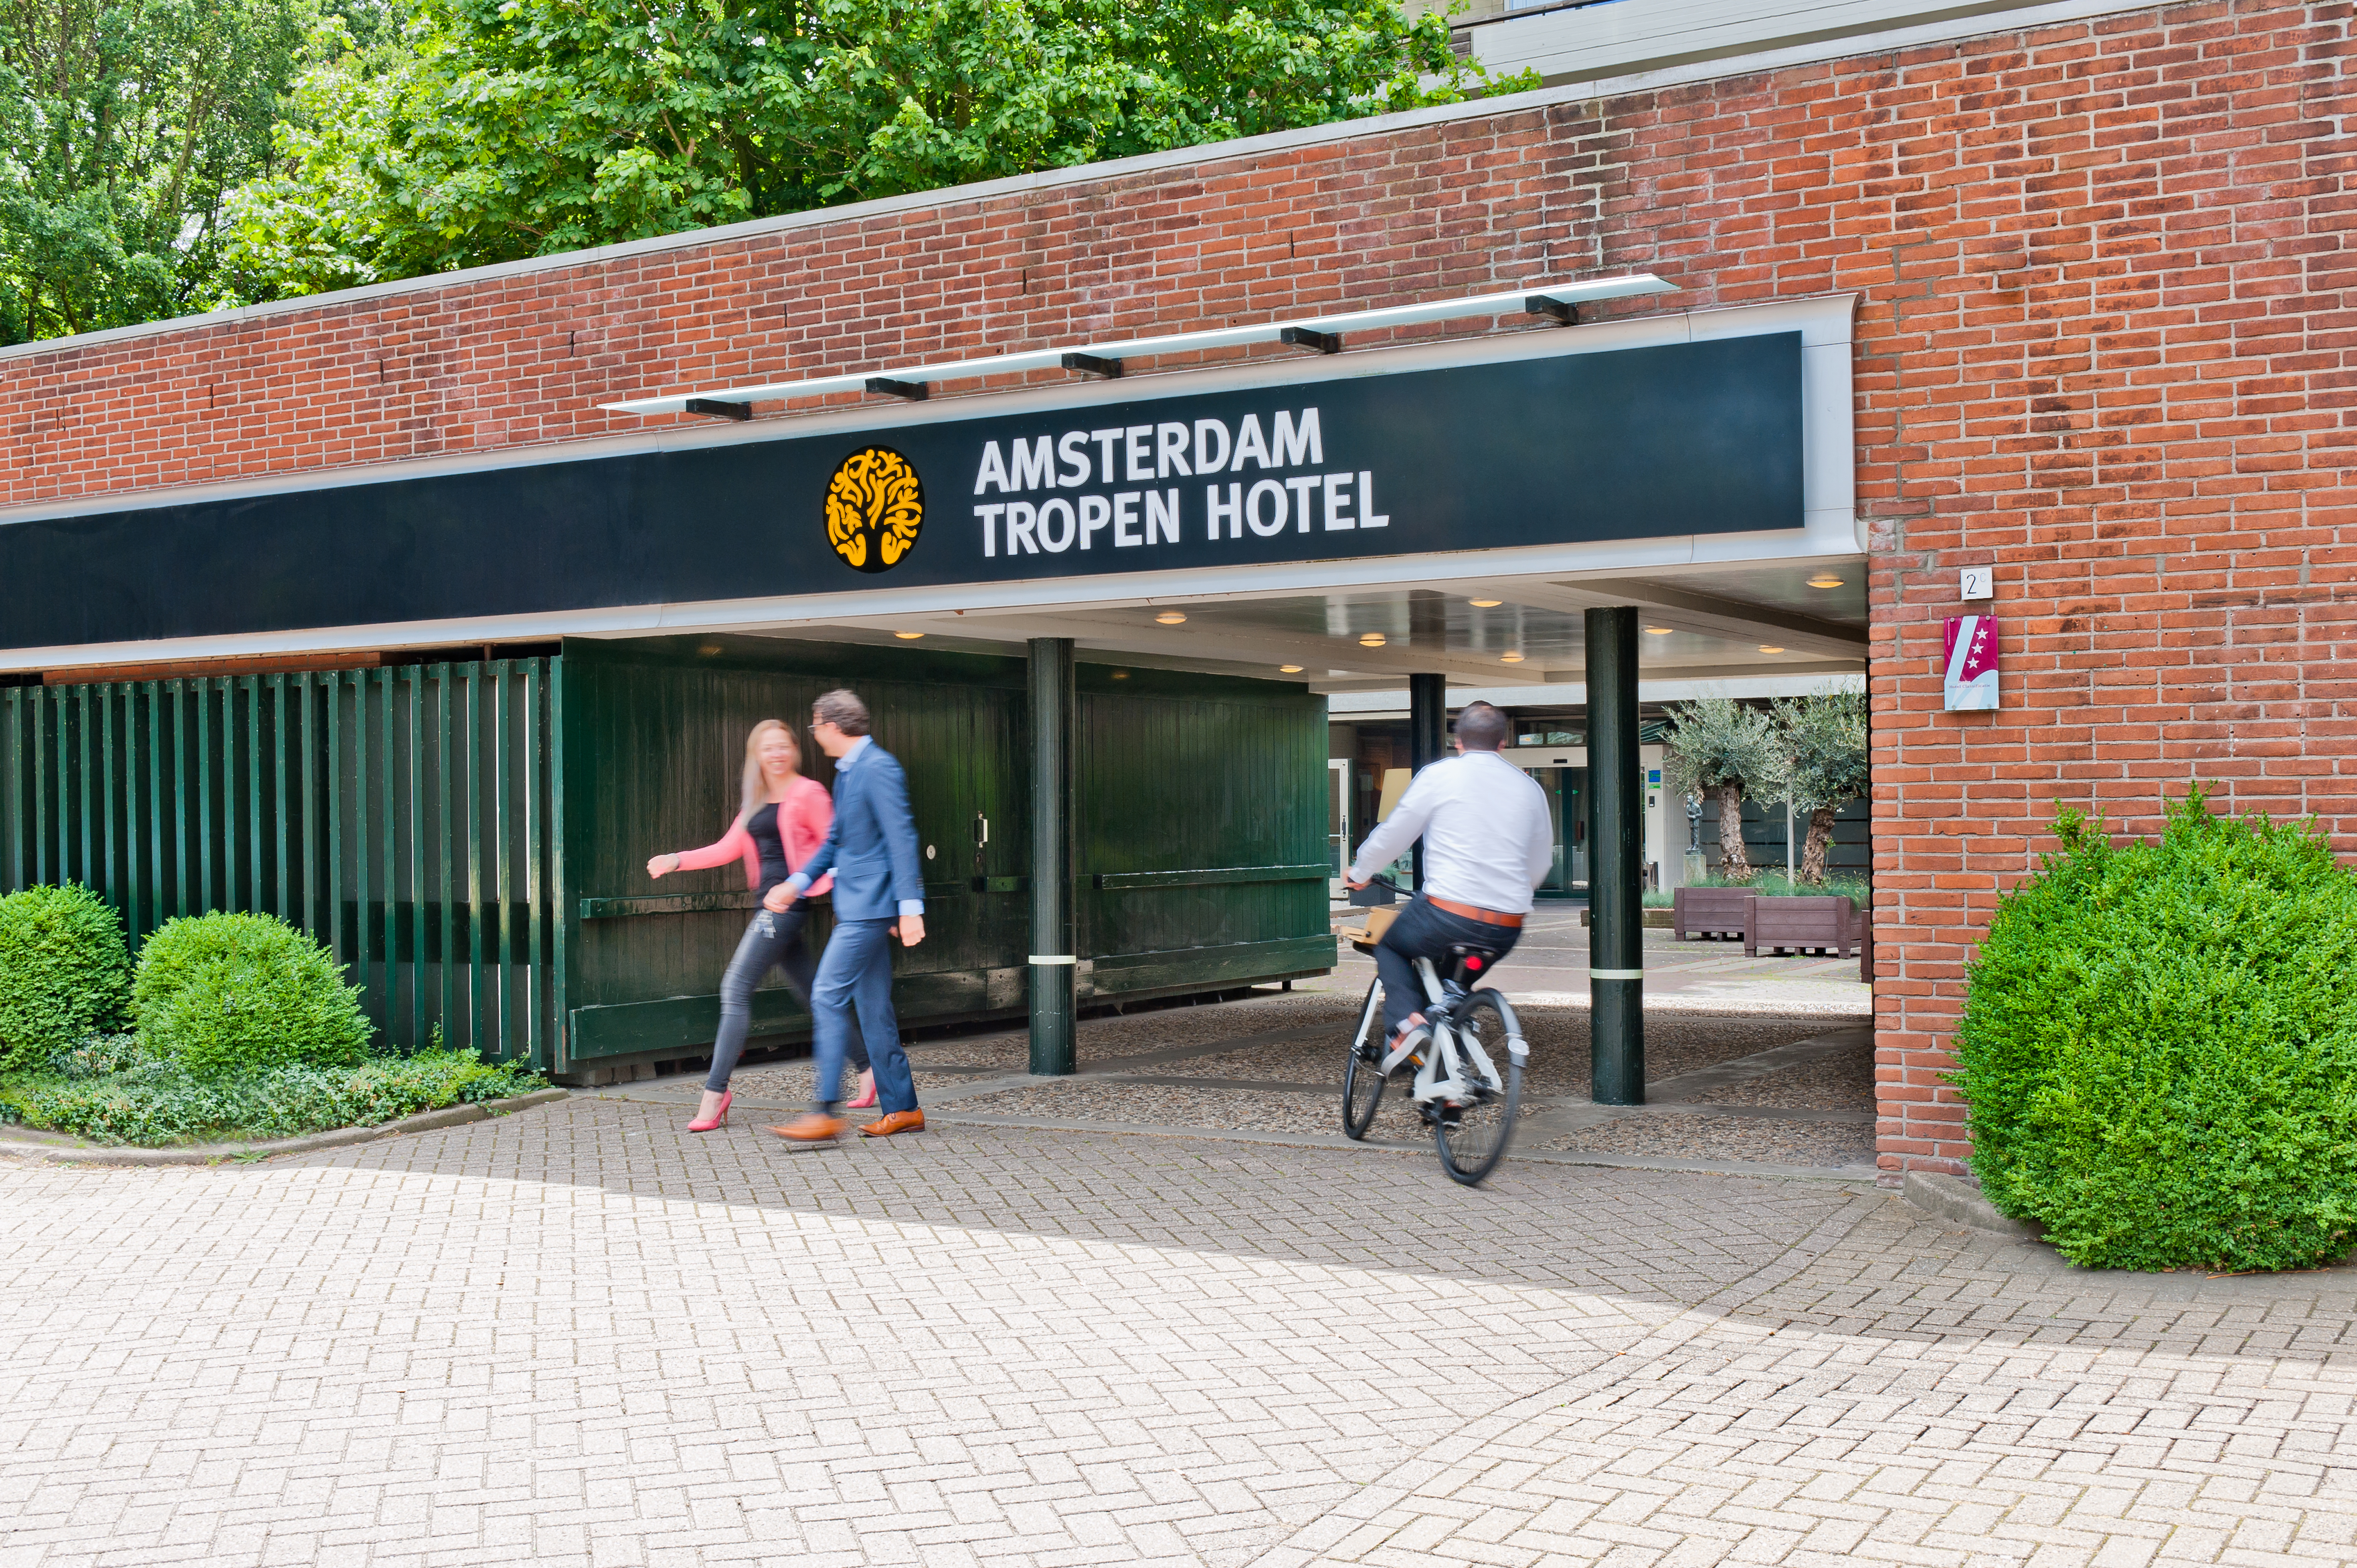 Amsterdam Tropen Hotel <br/>60.00 ew <br/> <a href='http://vakantieoplossing.nl/outpage/?id=867490a080dec979c99f3f0d9a221c71' target='_blank'>View Details</a>